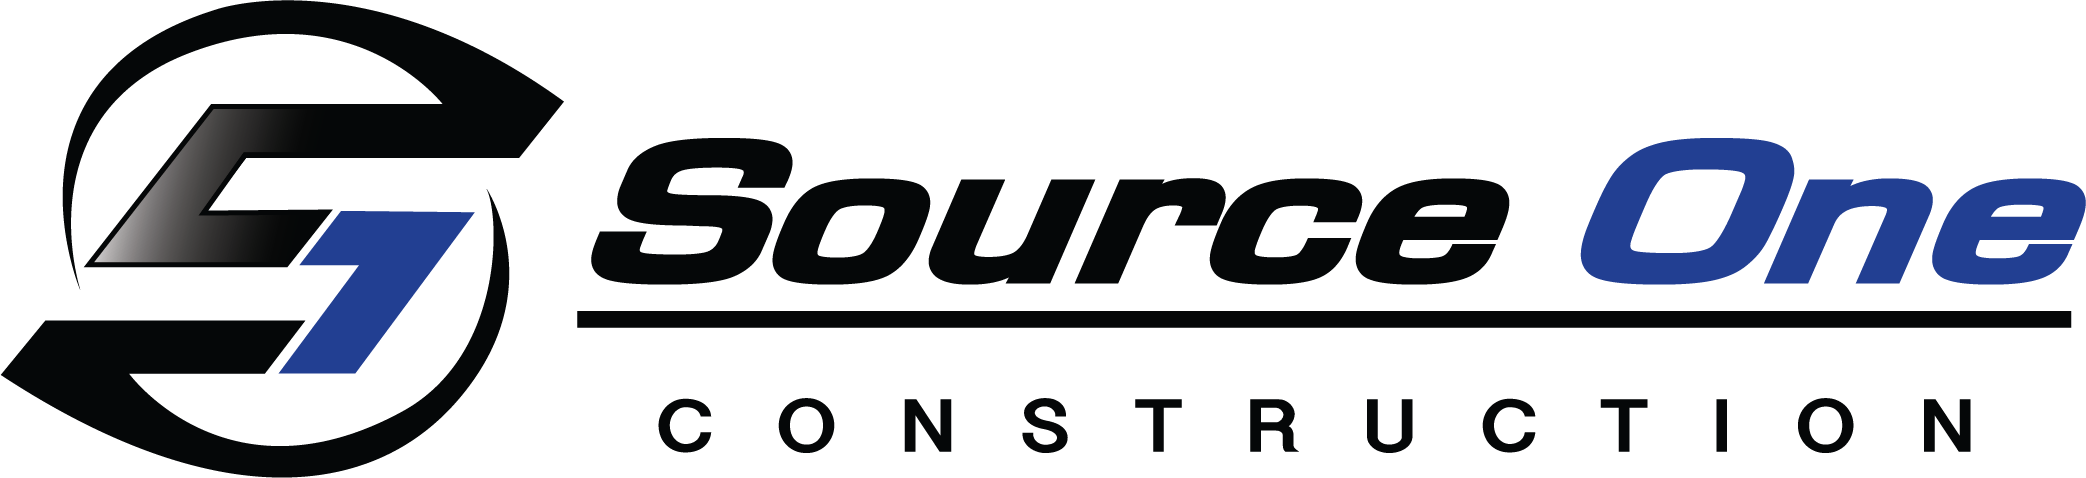 Source One Construction